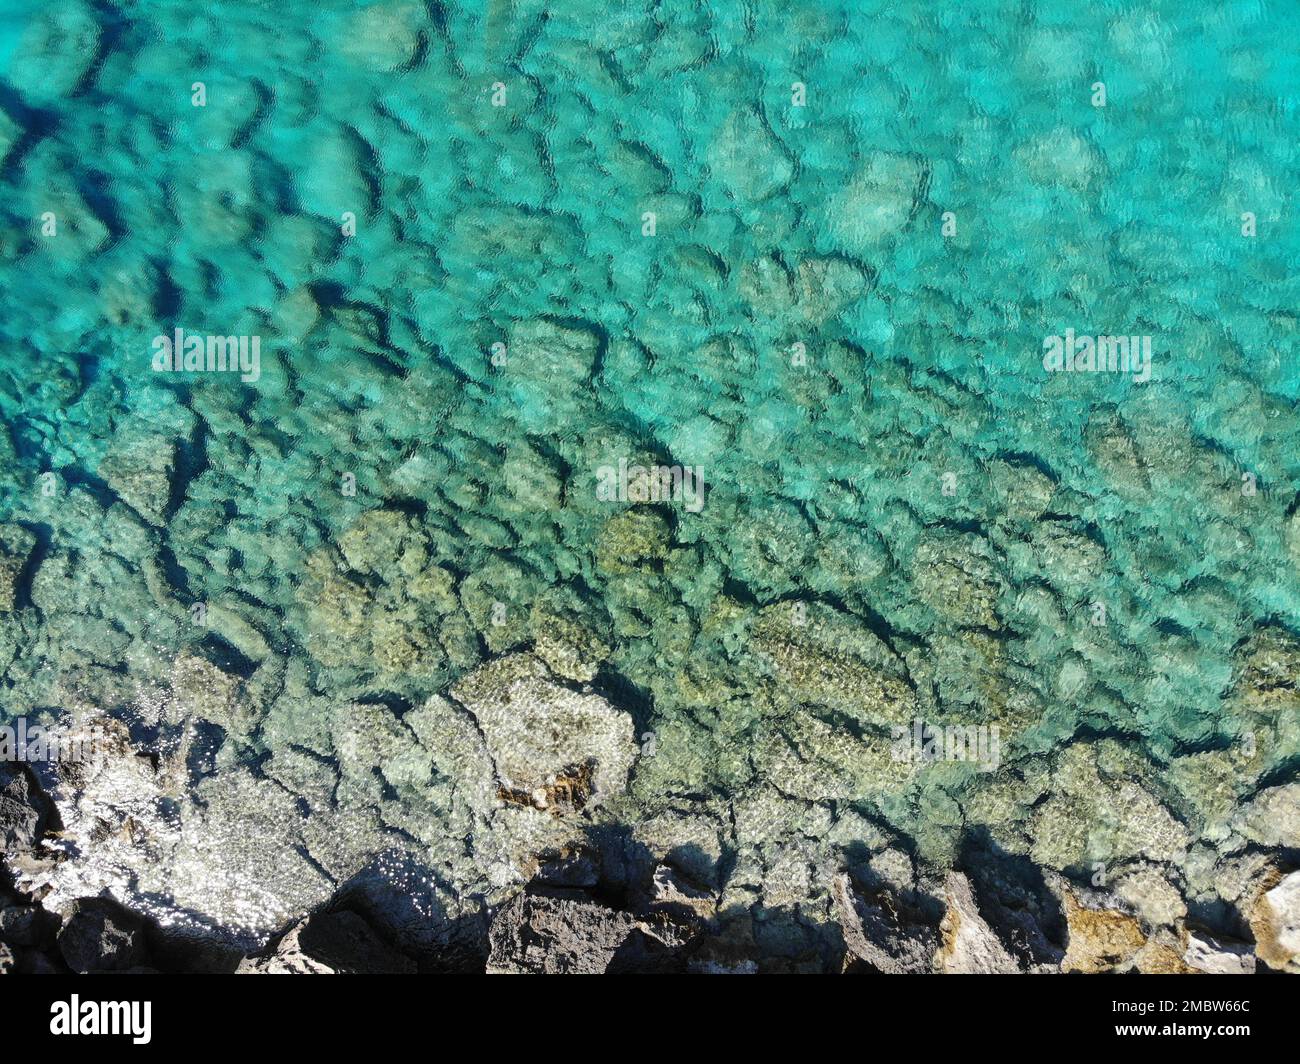 created by dji camera . Shot is taken in the city called ayia napa , Cyprus. Stock Photo